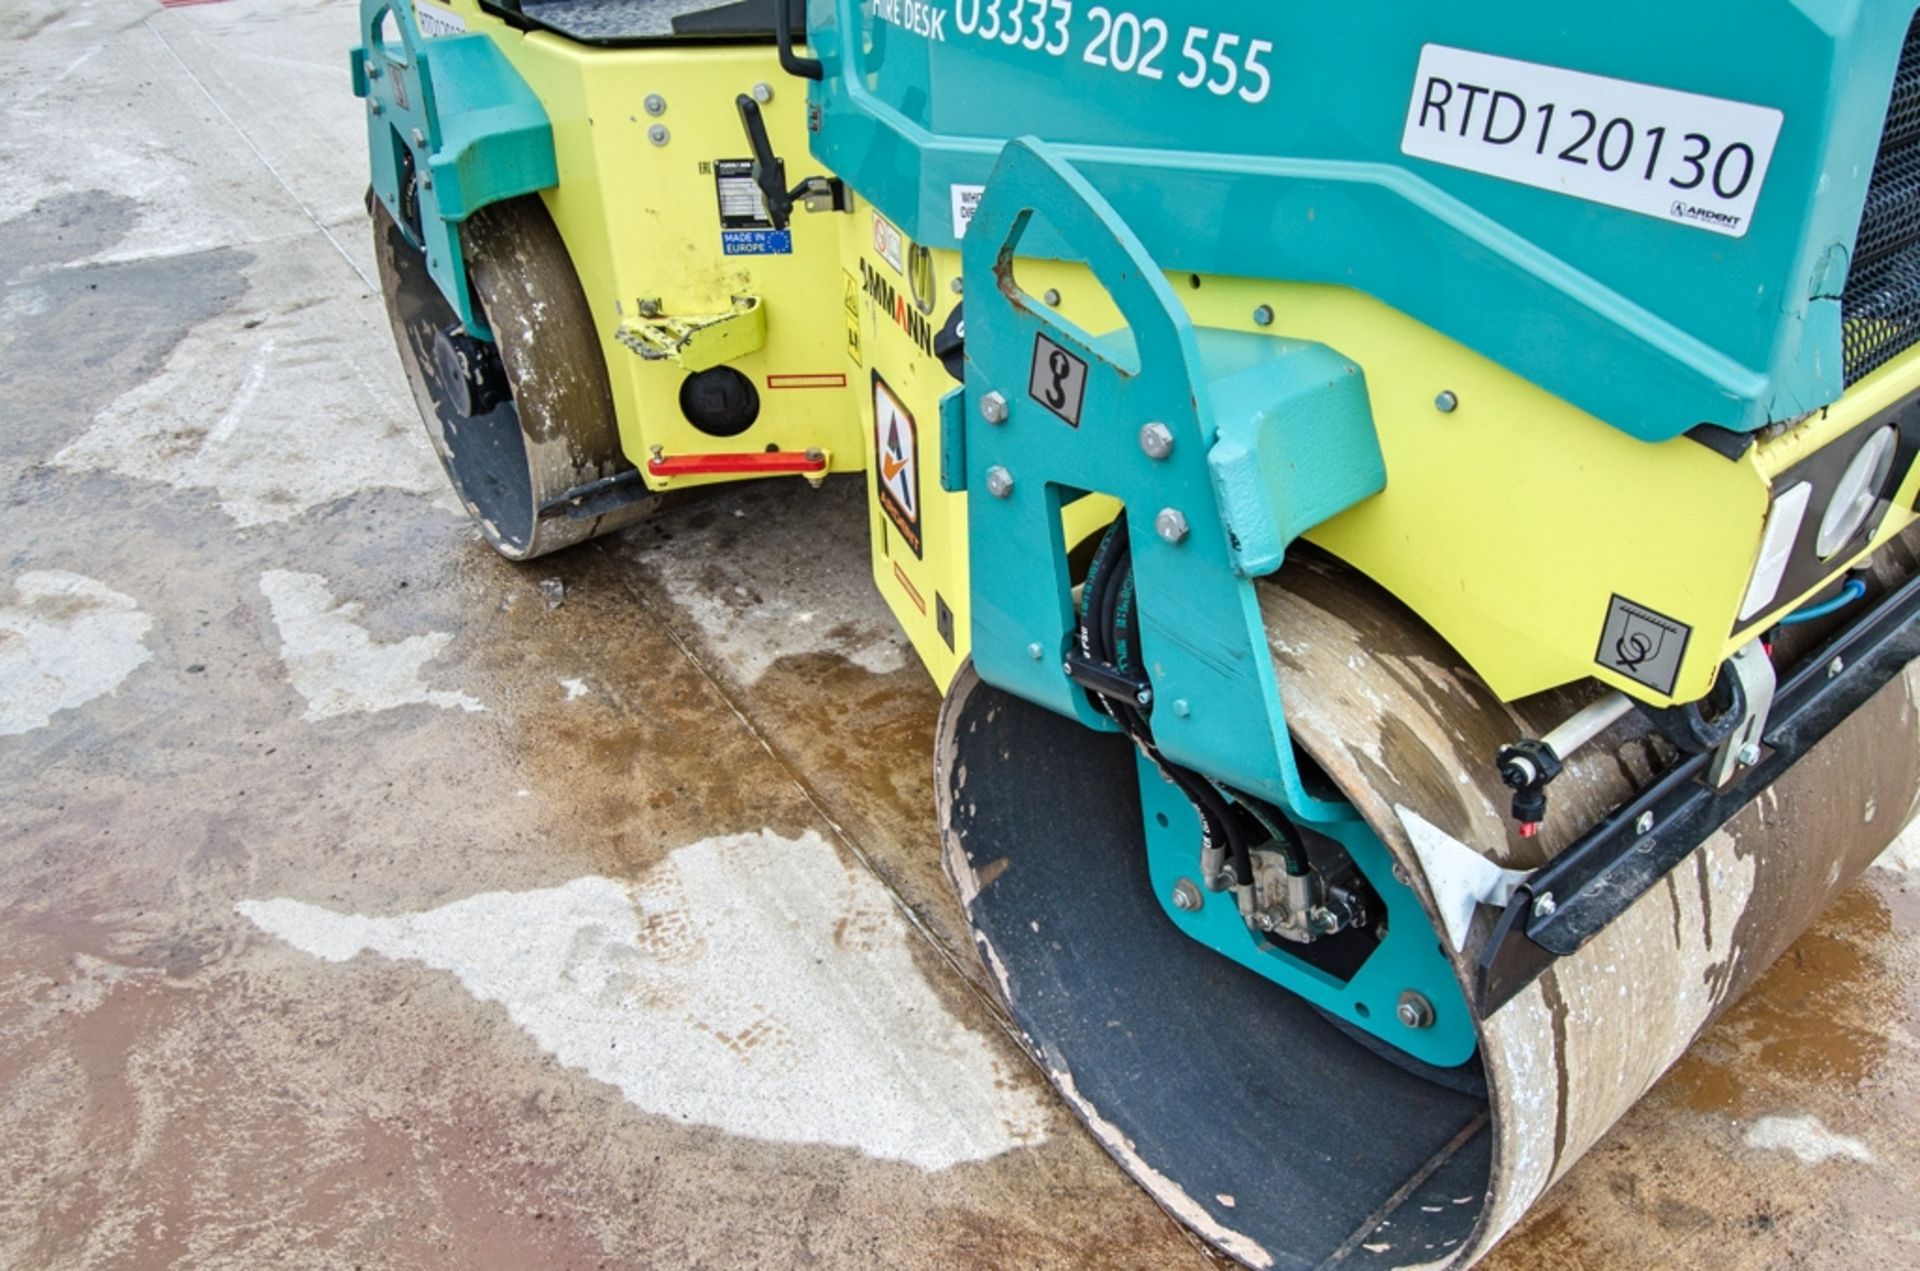 Ammann ARX 26-1 double drum ride on roller Year: 2022 S/N: 3023580 Recorded Hours: 225 RTD120130 - Image 9 of 21